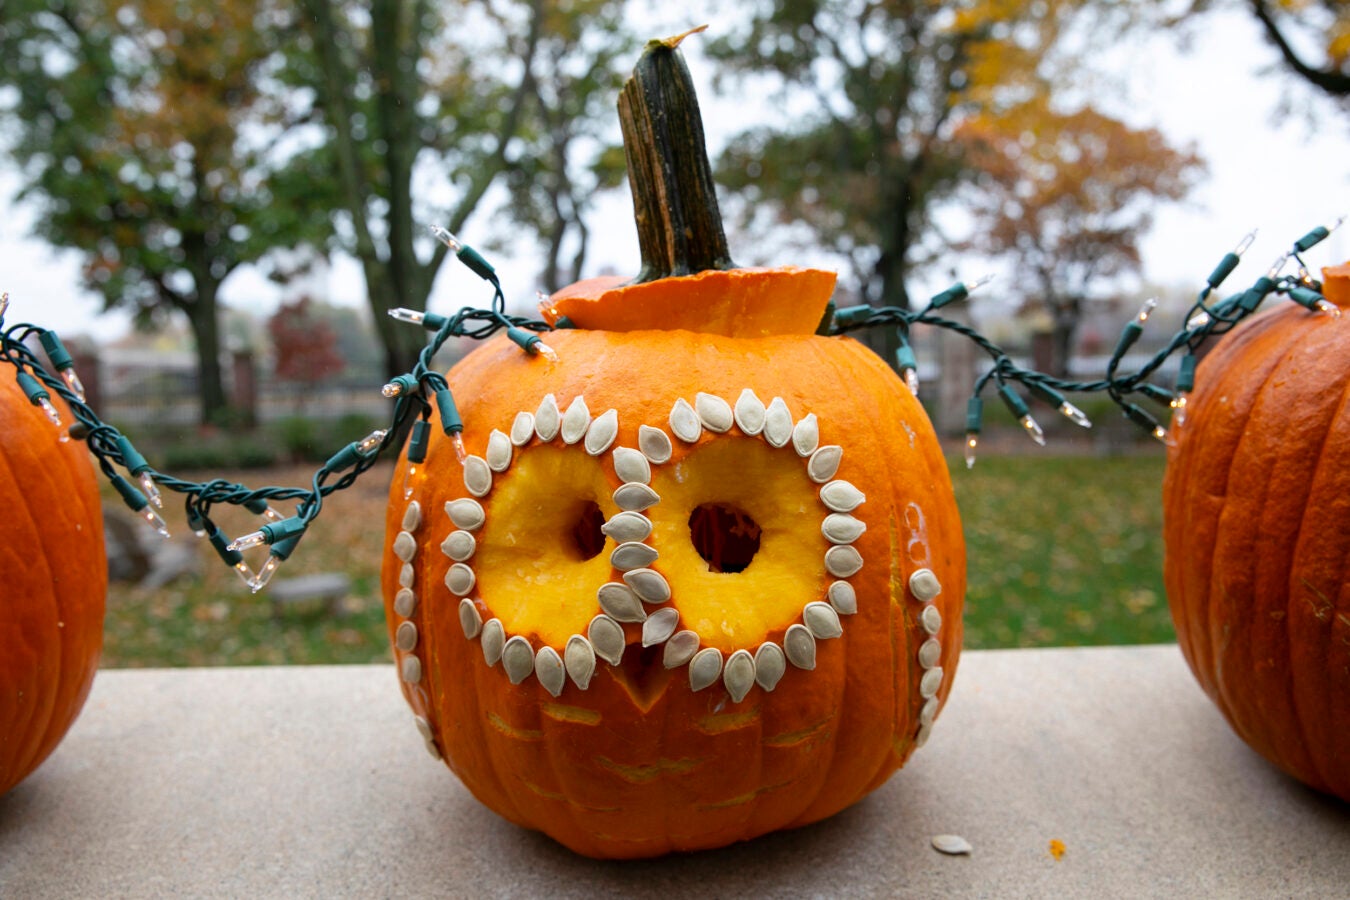 A pumpkin decorated with pumpkin seeds is on display outside of Winthrop House.